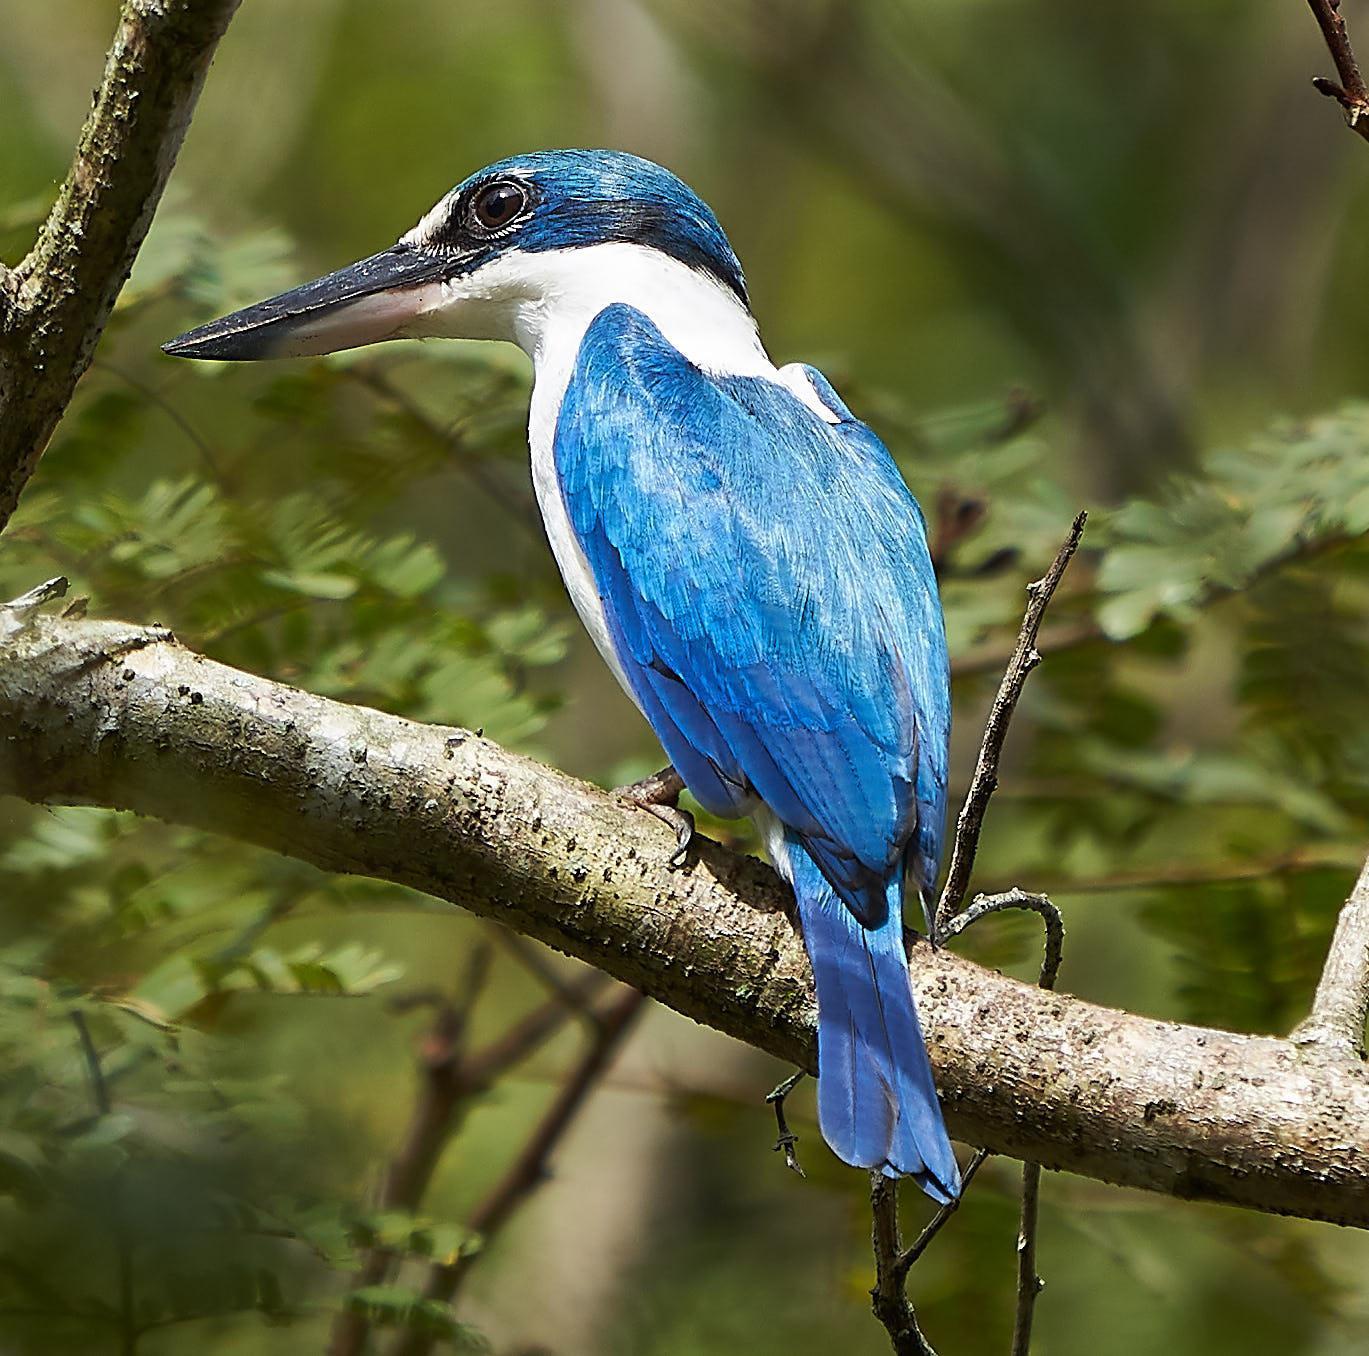 Collared Kingfisher Photo by Steven Cheong